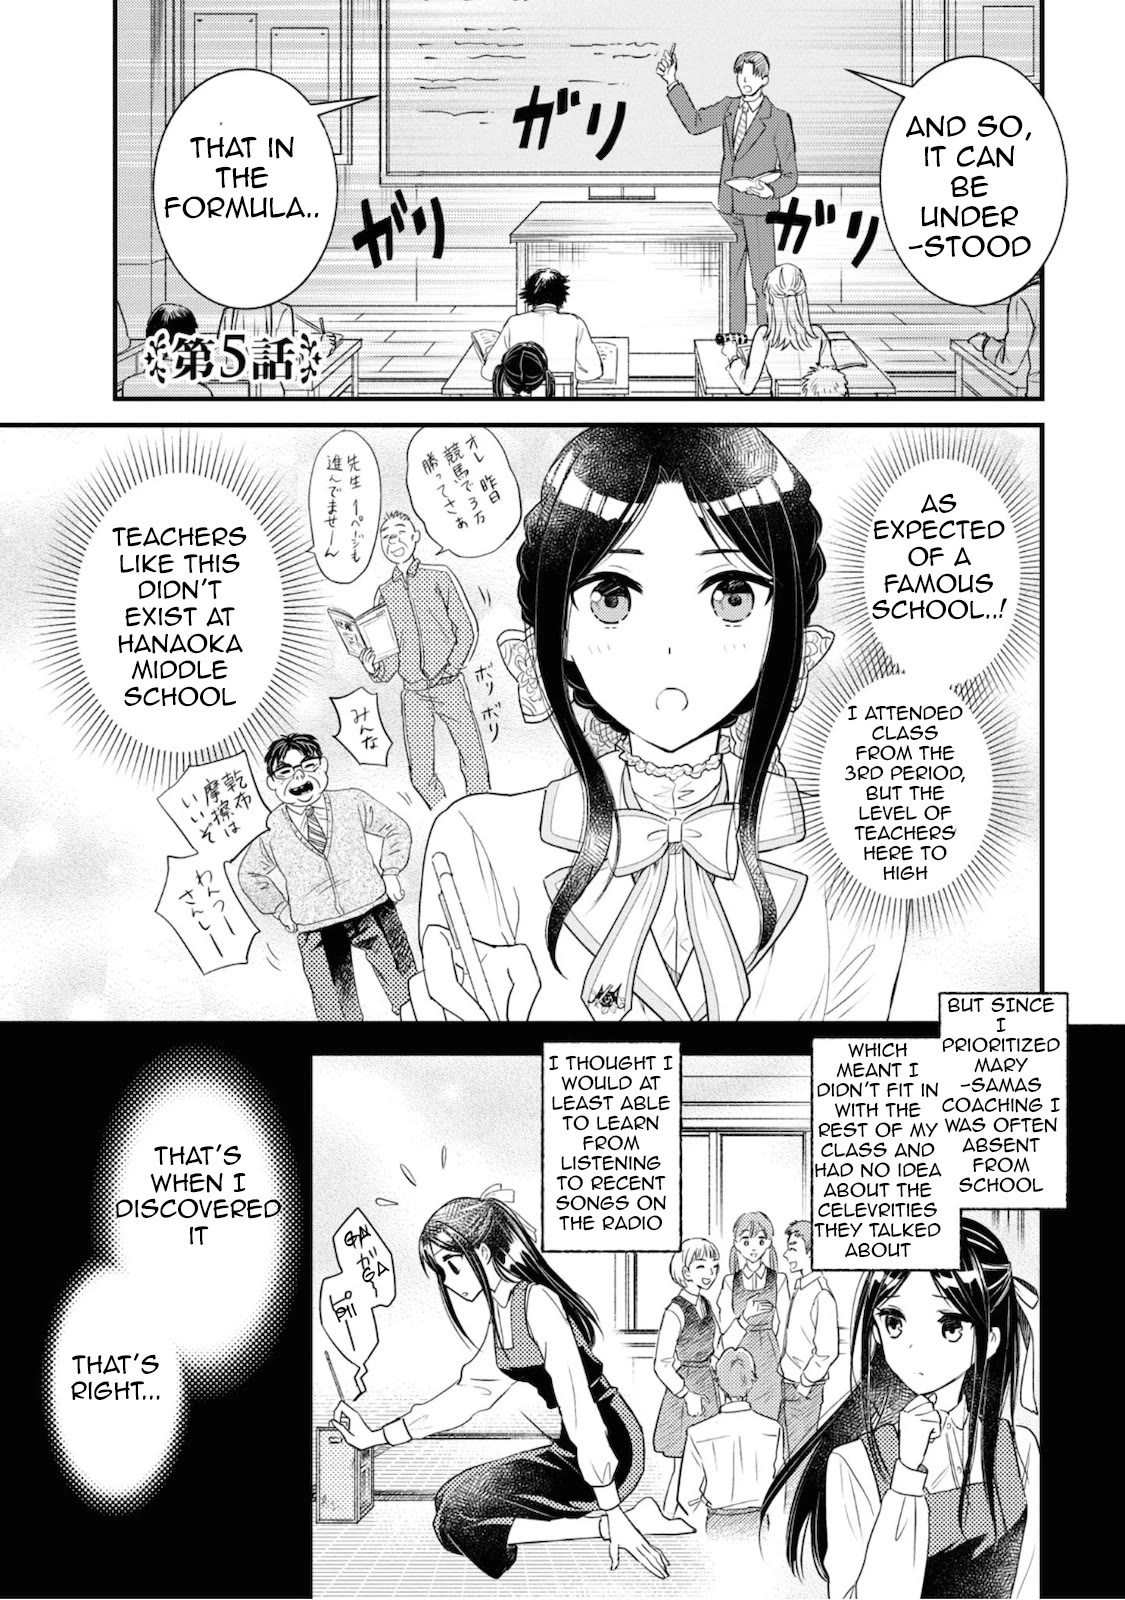 Reiko's Style: Despite Being Mistaken For A Rich Villainess, She's Actually Just Penniless - Page 1